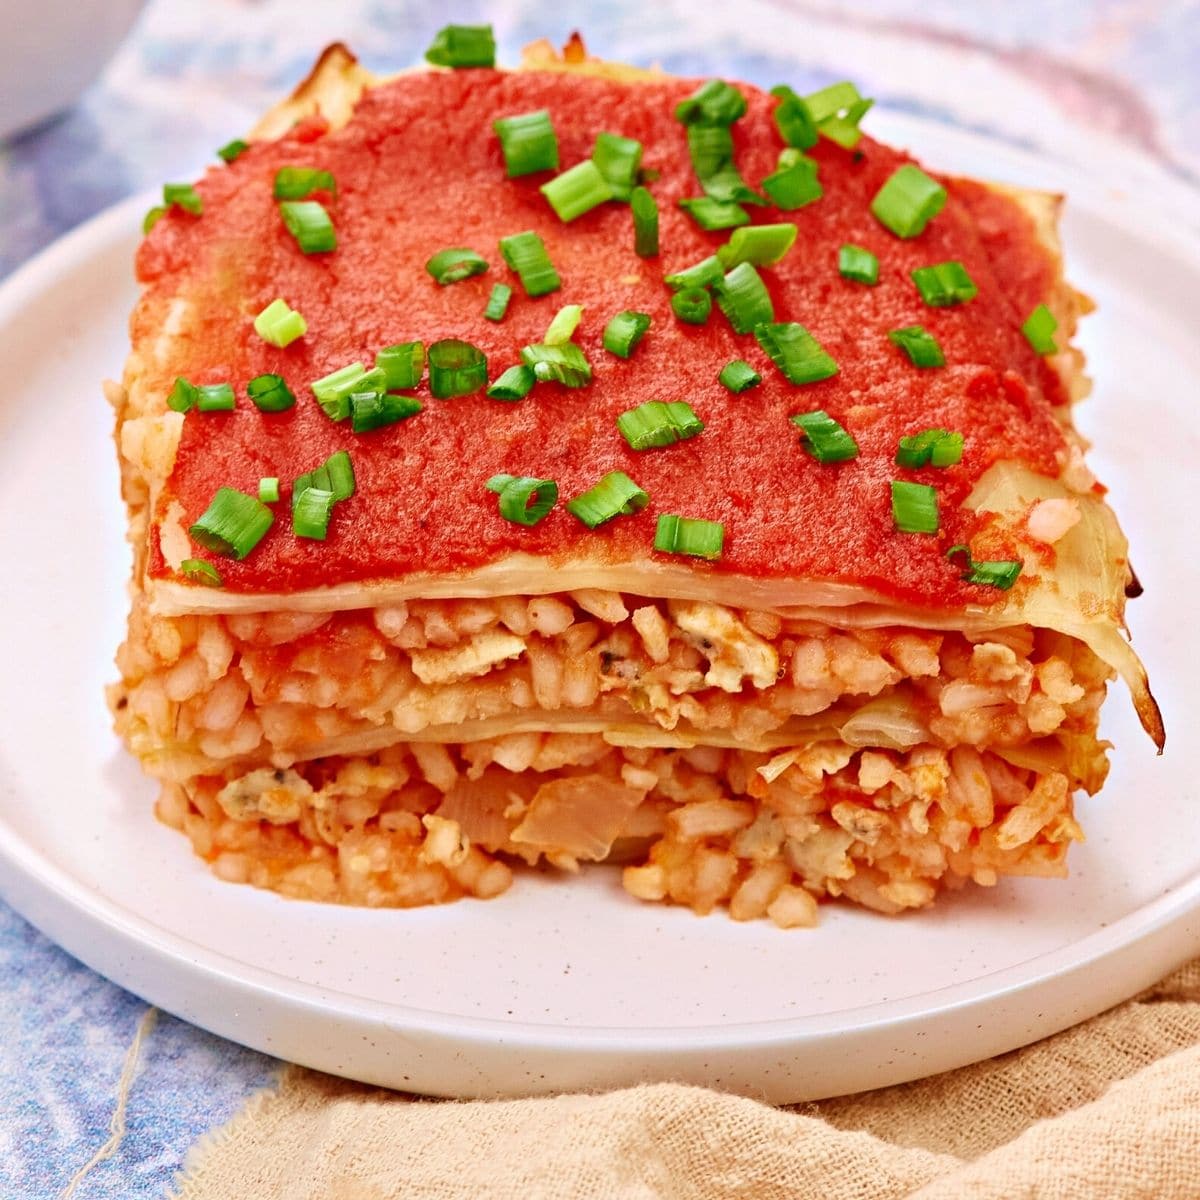 Cabbage rolls casserole served on a white plate.